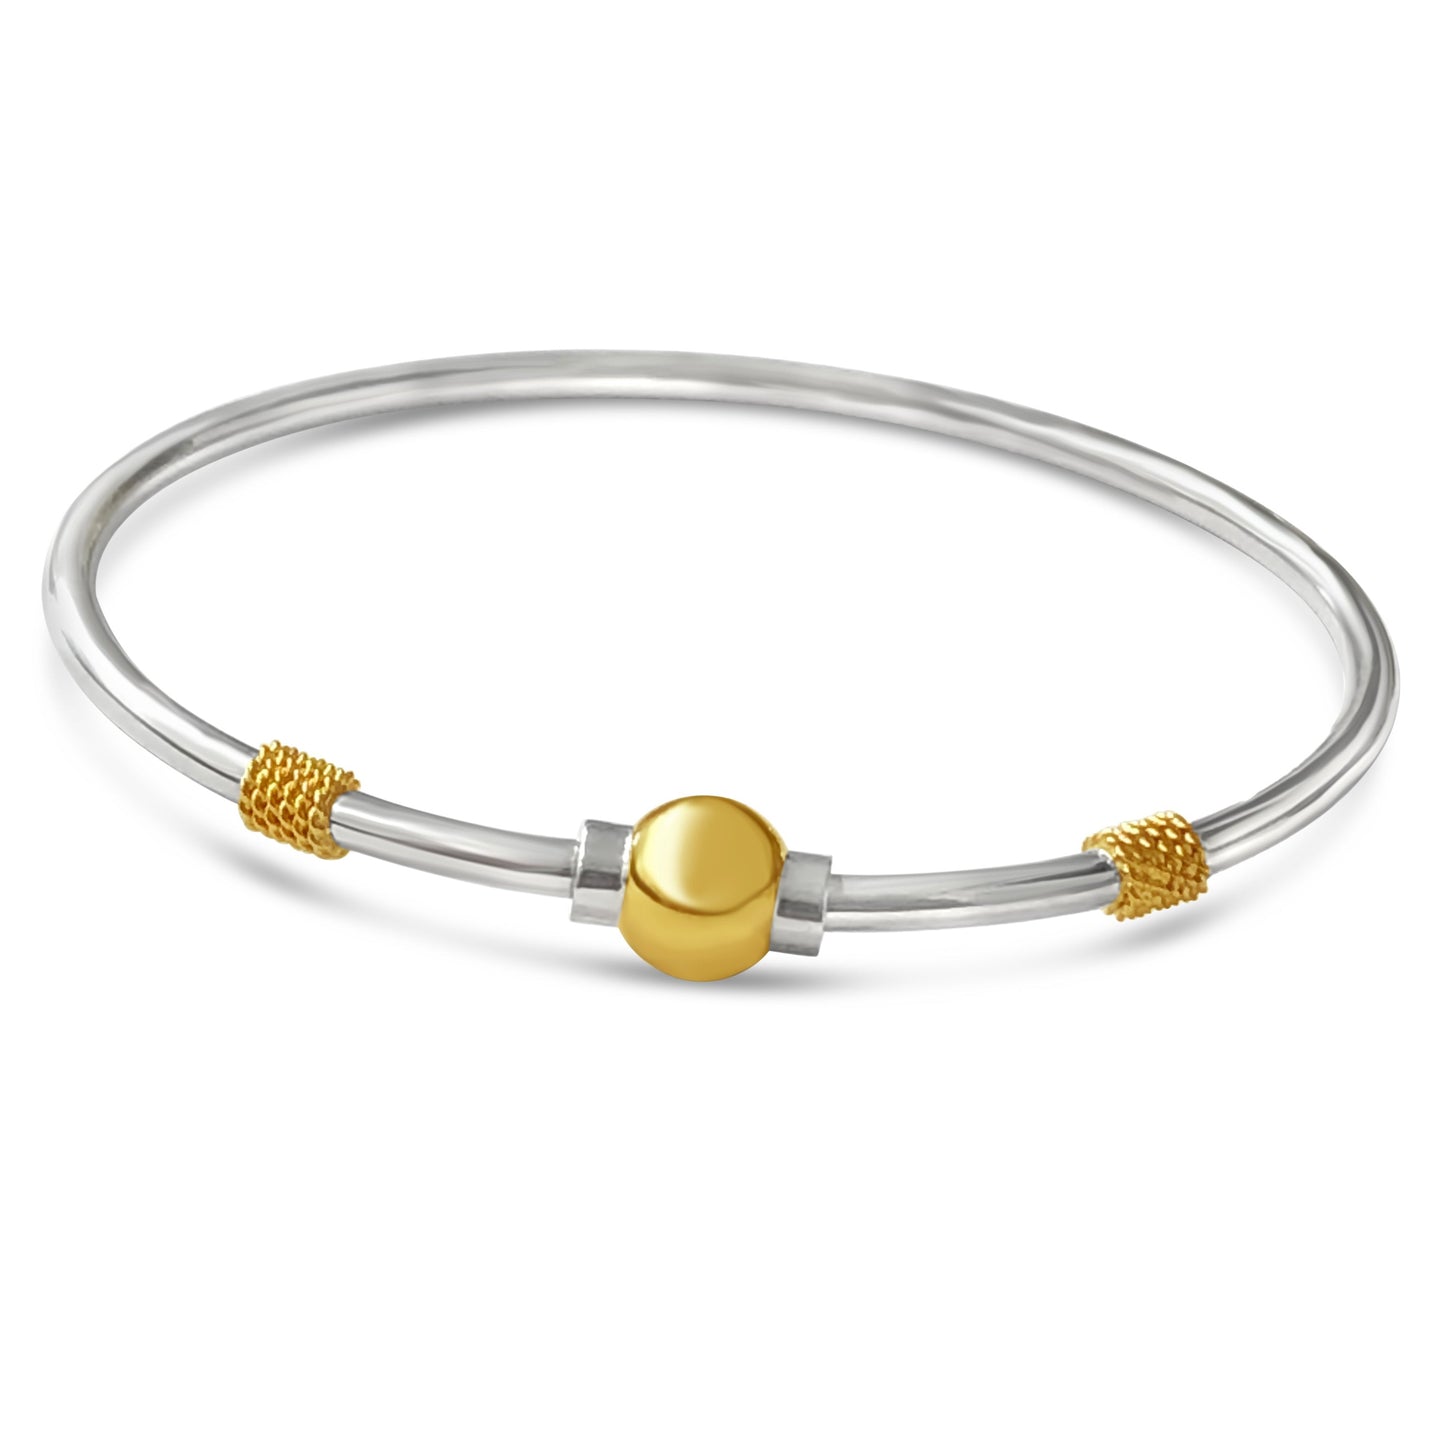 cape cod beachball bracelet with nautical rope 14k gold sterling silver made on cape cod